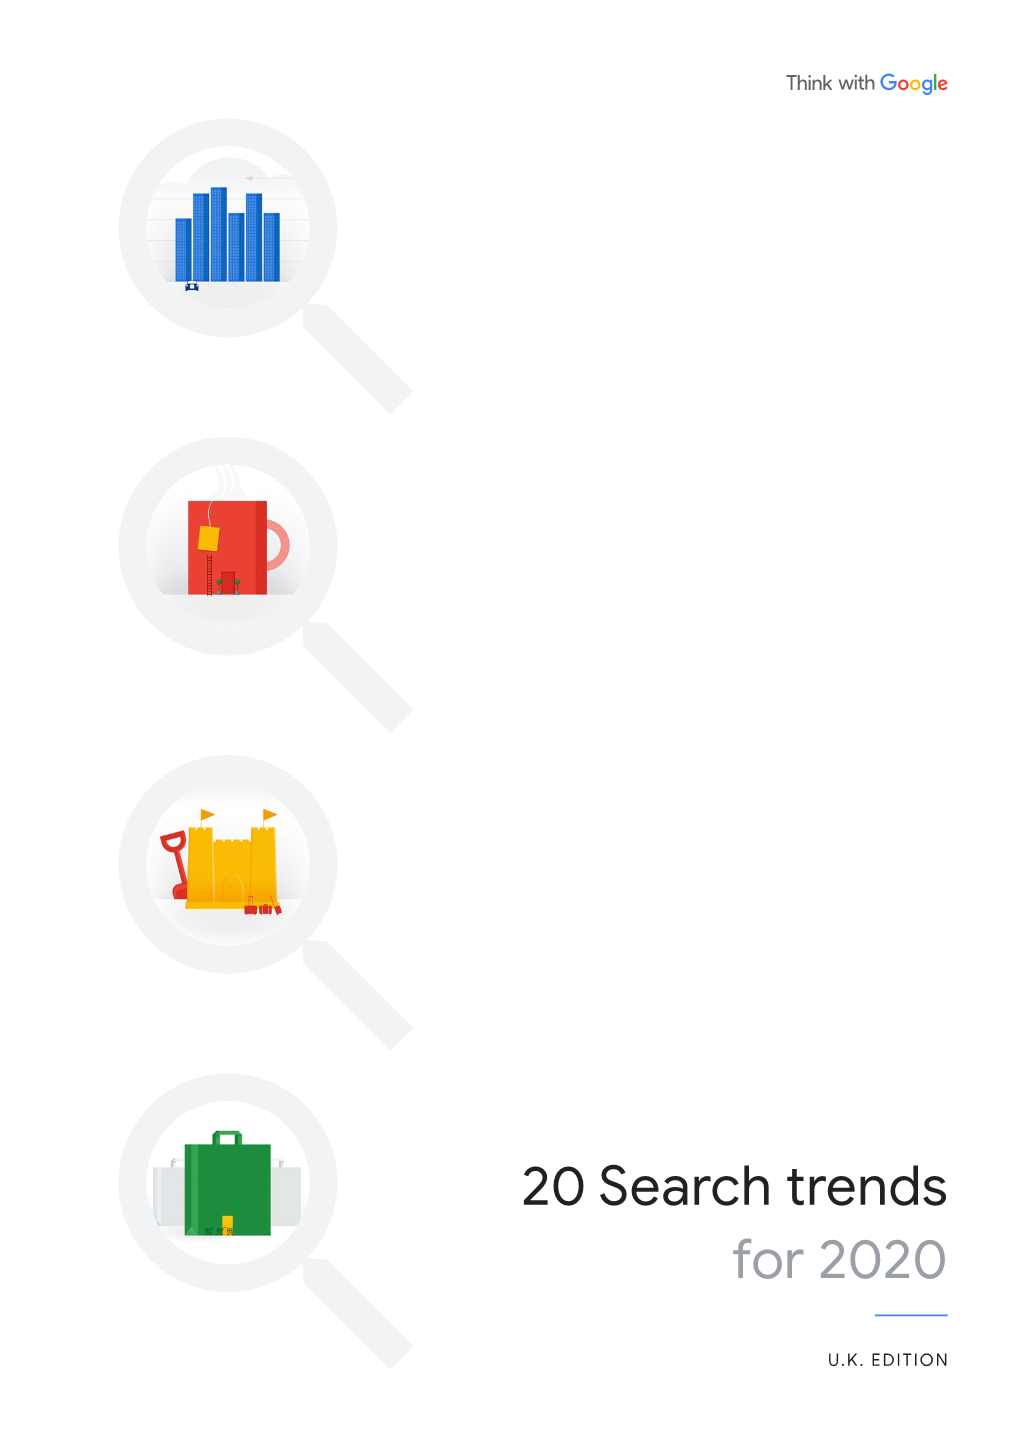 20 Search Trends for 2020